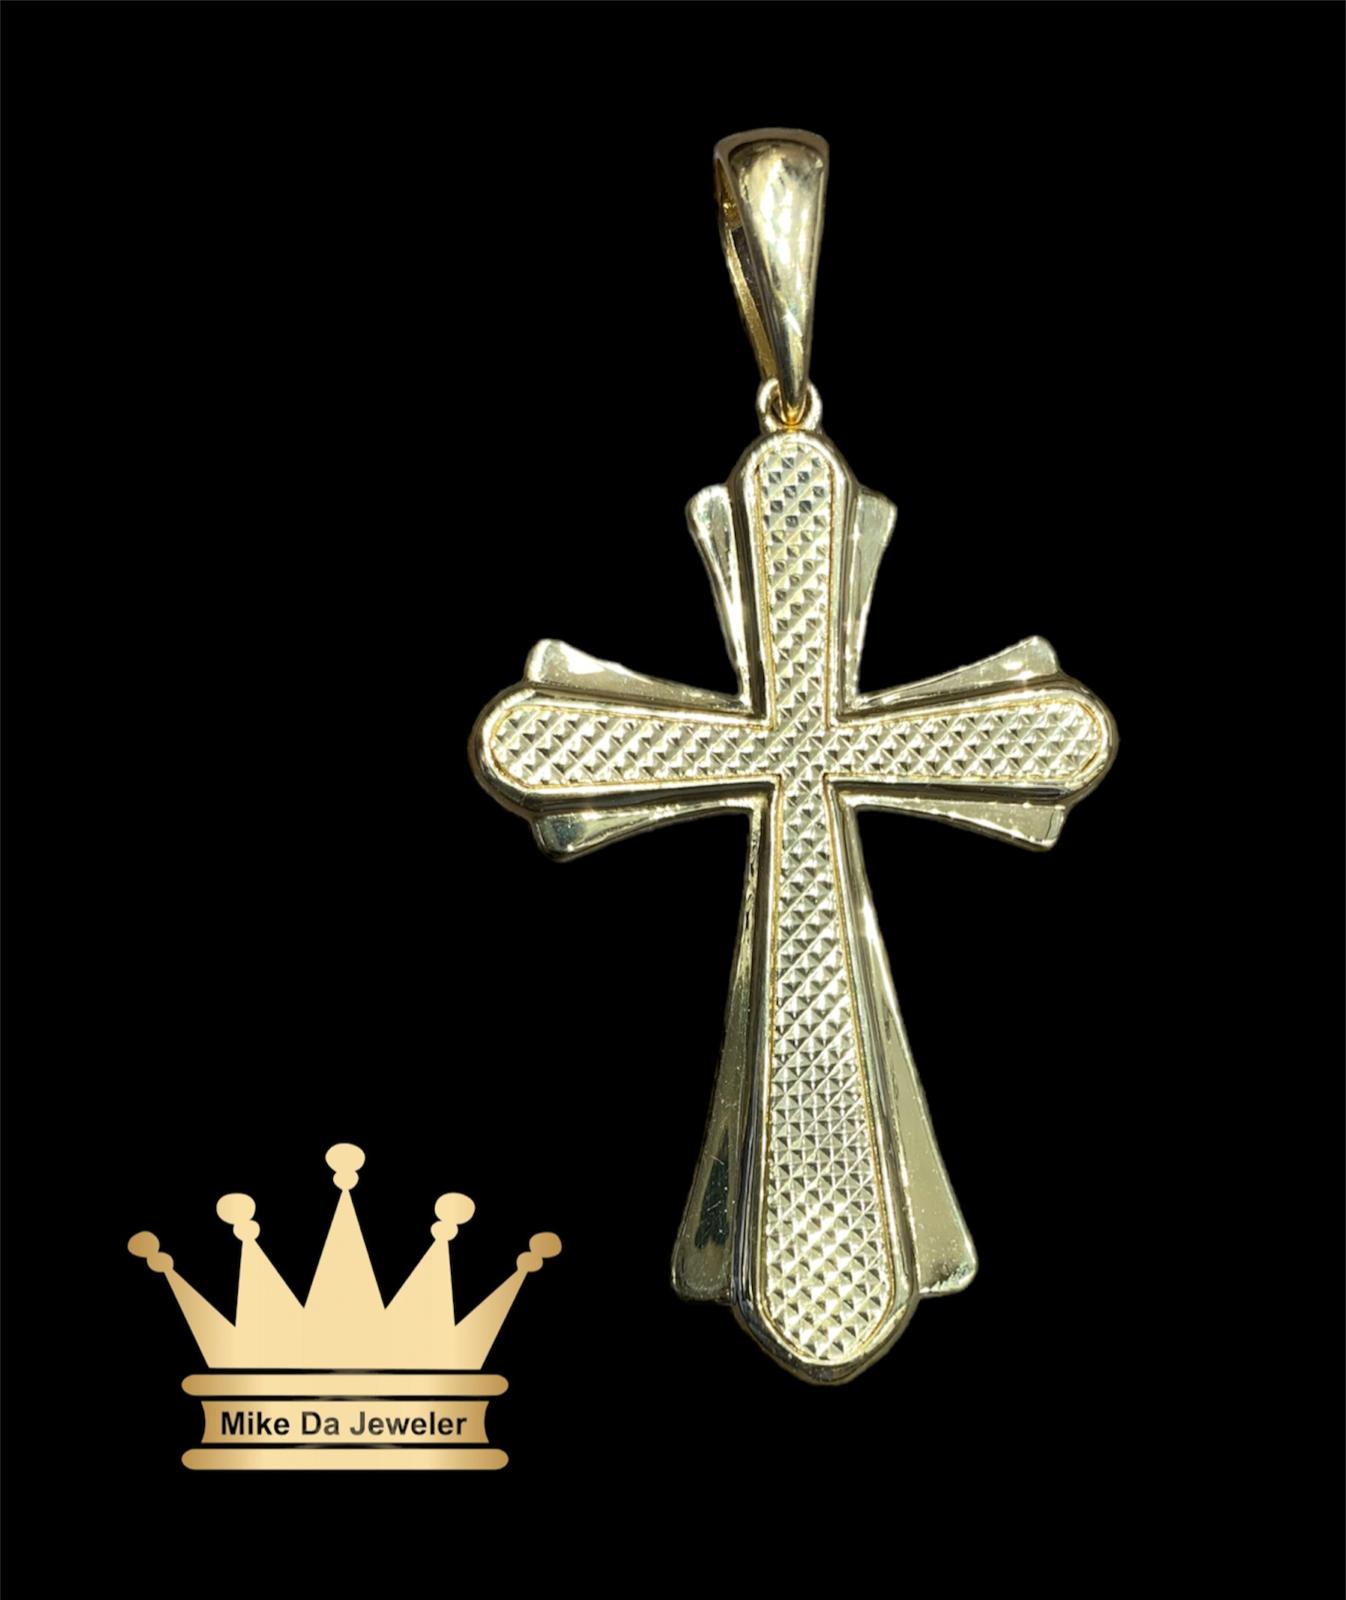 18k solid handmade cross price $1100 dollars weight 10.51 grams size 2 inches